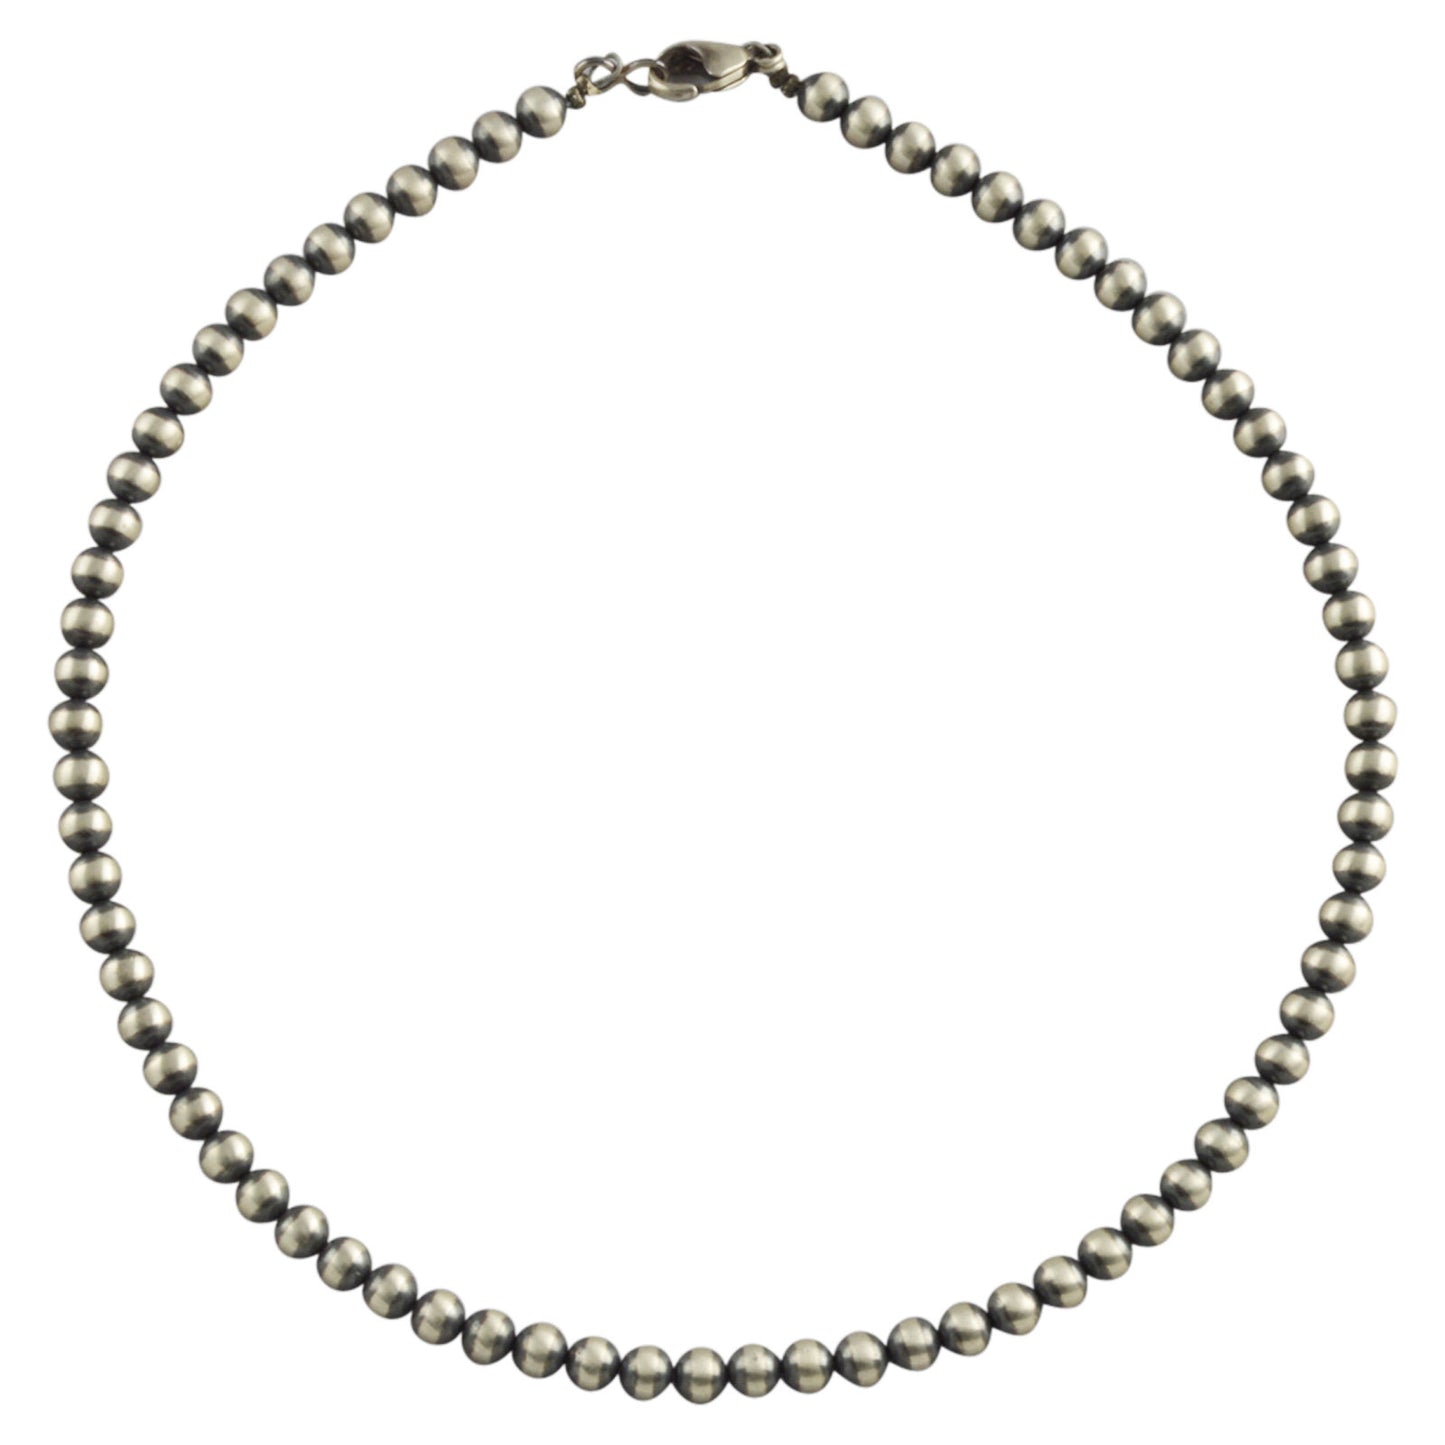 Sterling Silver Navajo Pearl 6mm Oxidize Round Bead Necklace. Available from 14" to 60"